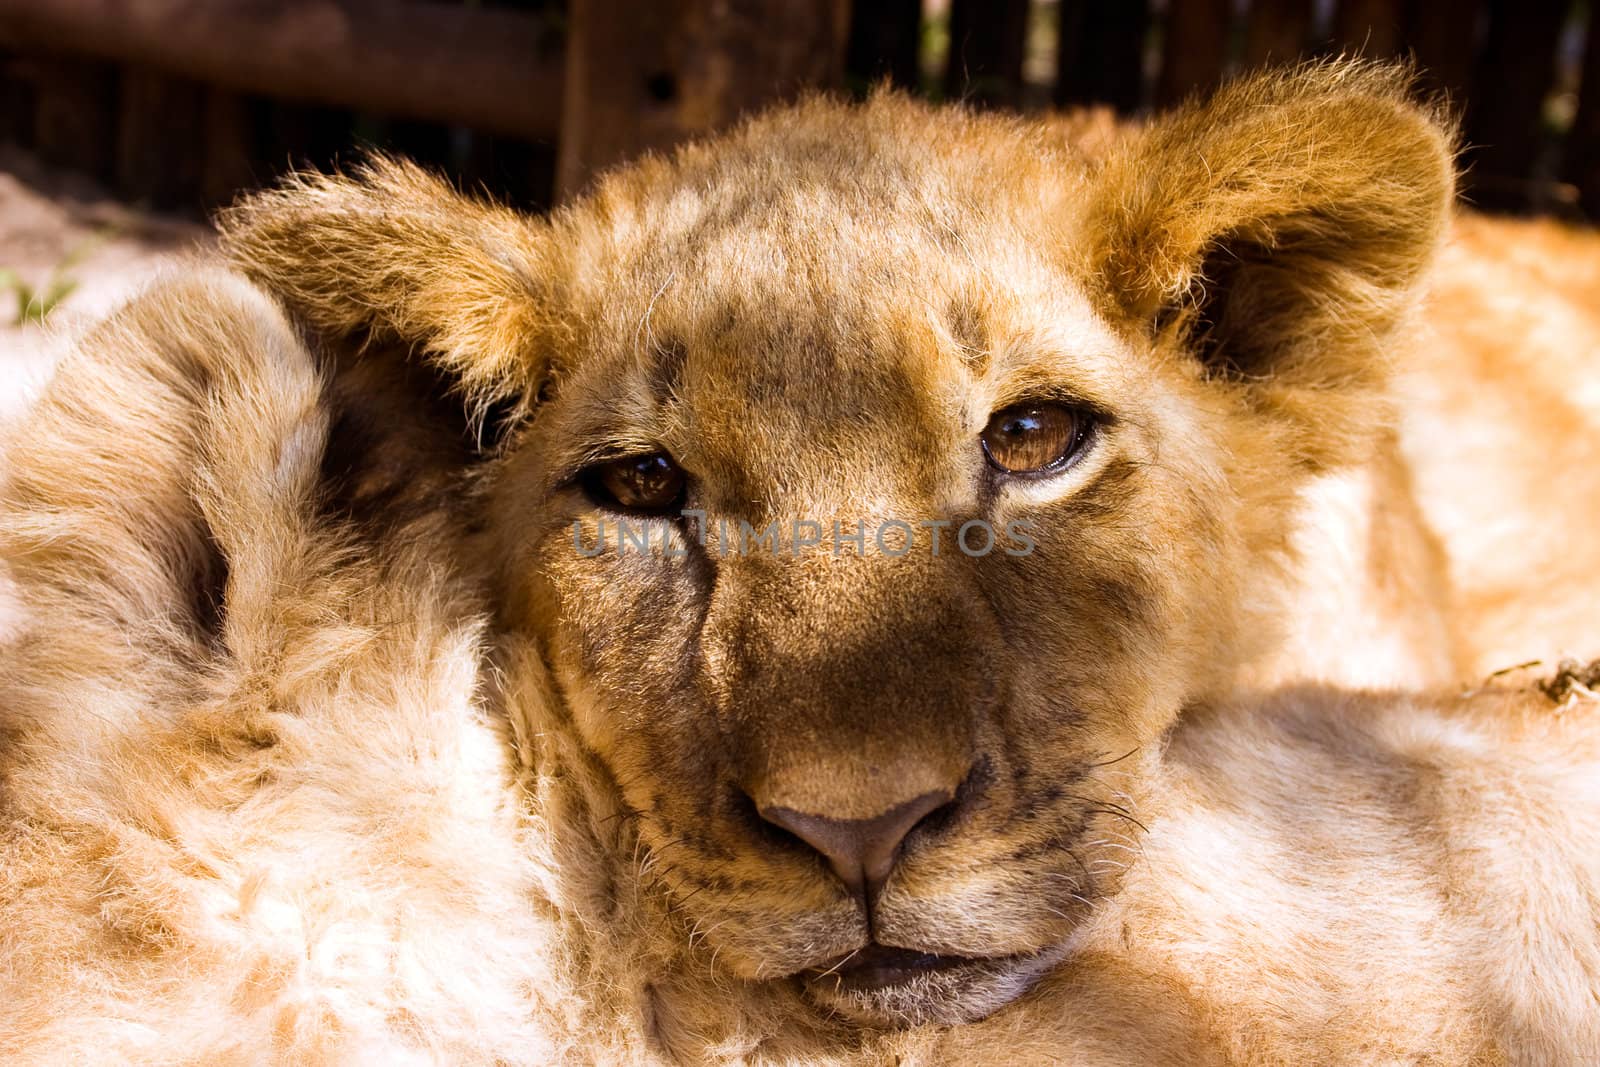 Lion cub relaxing with head resting on another cub, looking at the camera